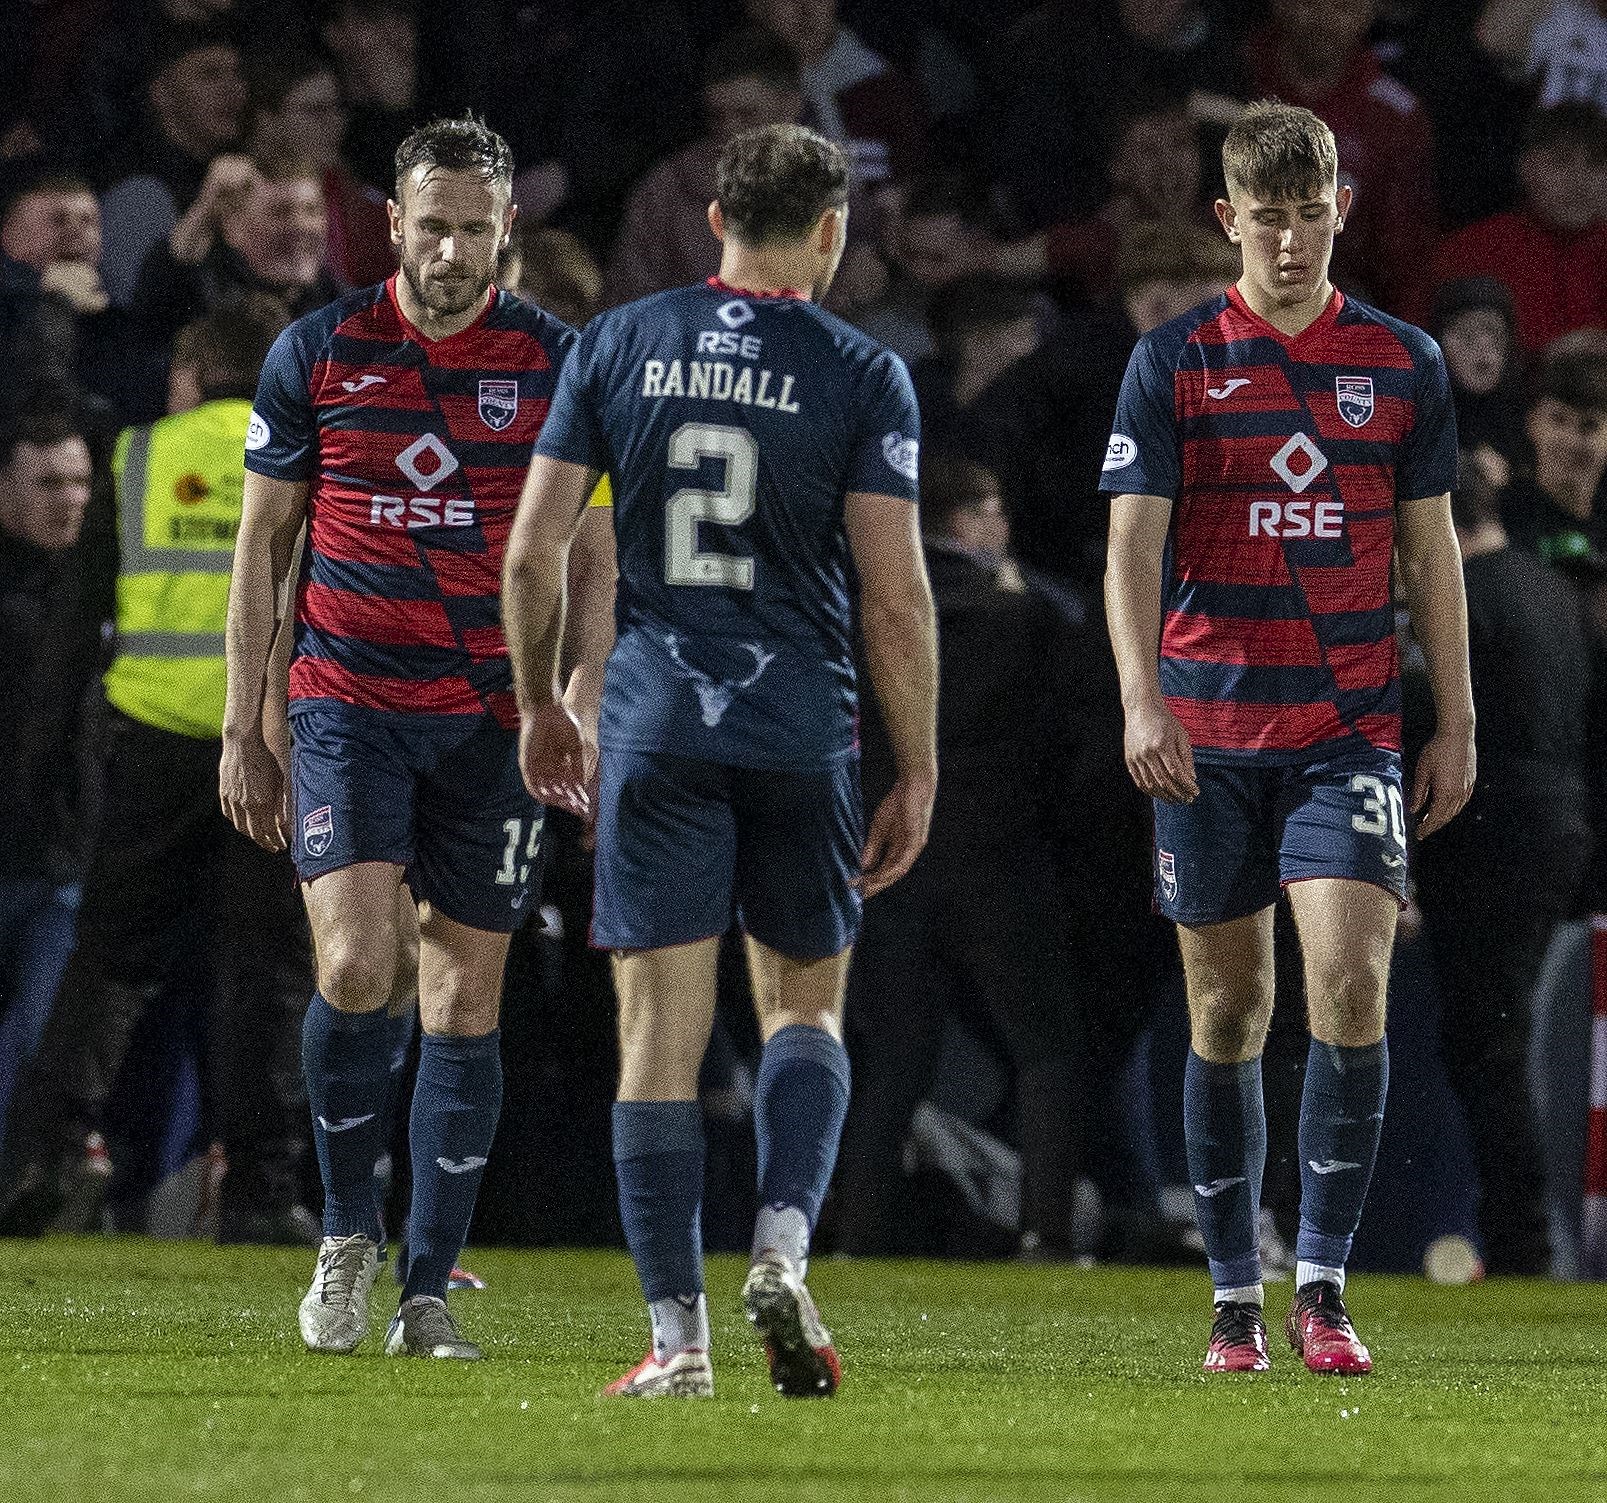 Dylan Smith (right) was shown a red card early on against Partick Thistle. Picture: Ken Macpherson